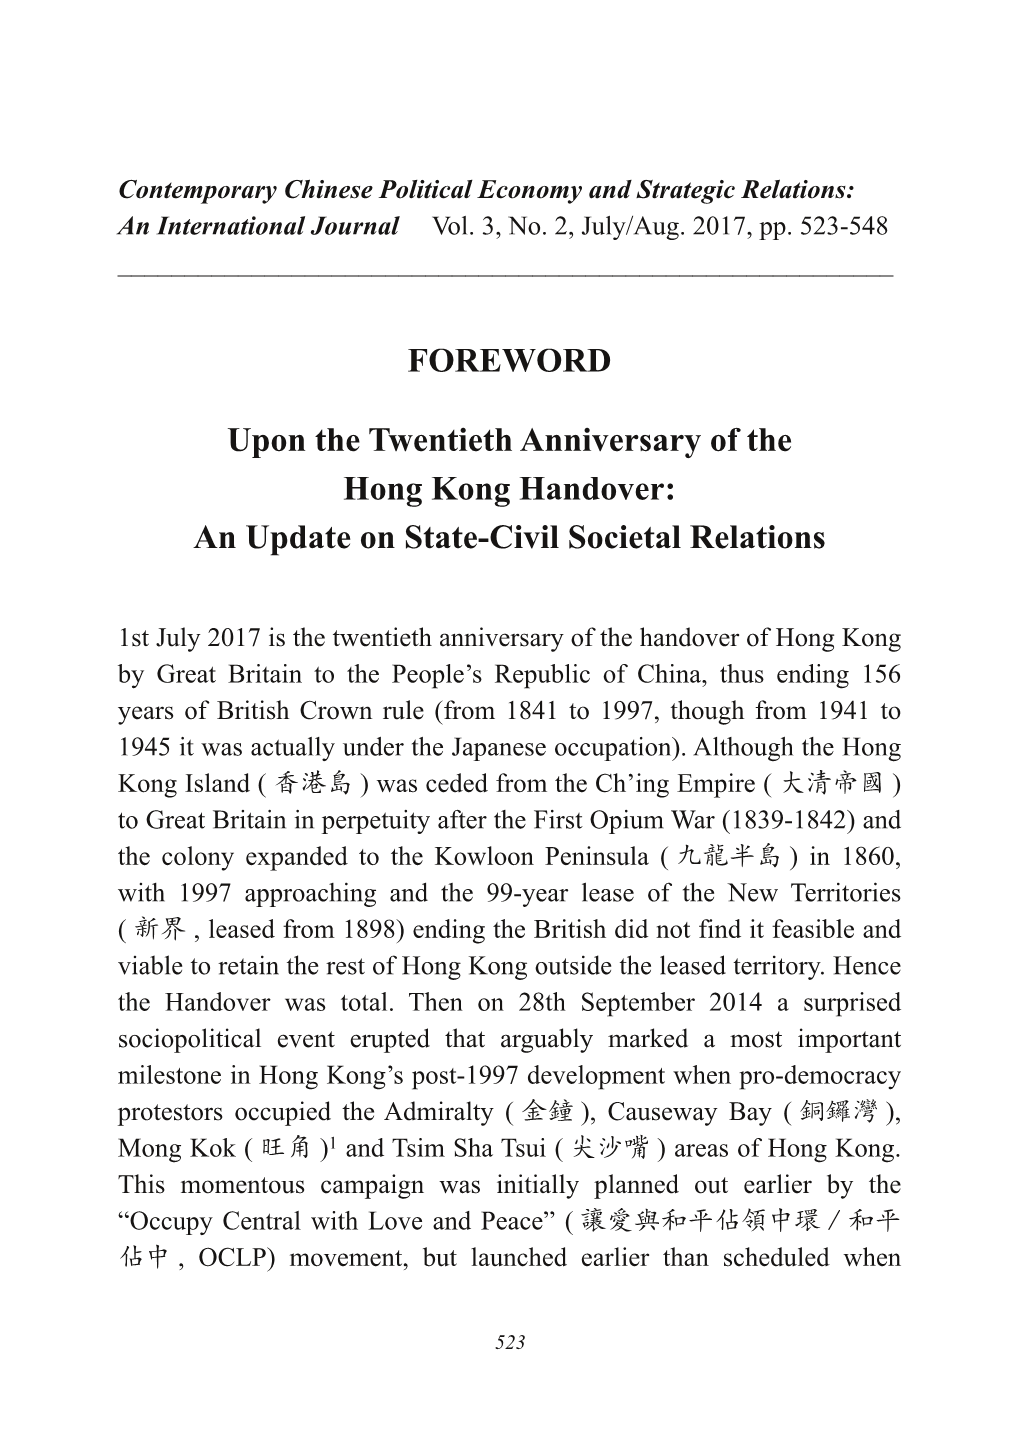 FOREWORD Upon the Twentieth Anniversary of the Hong Kong